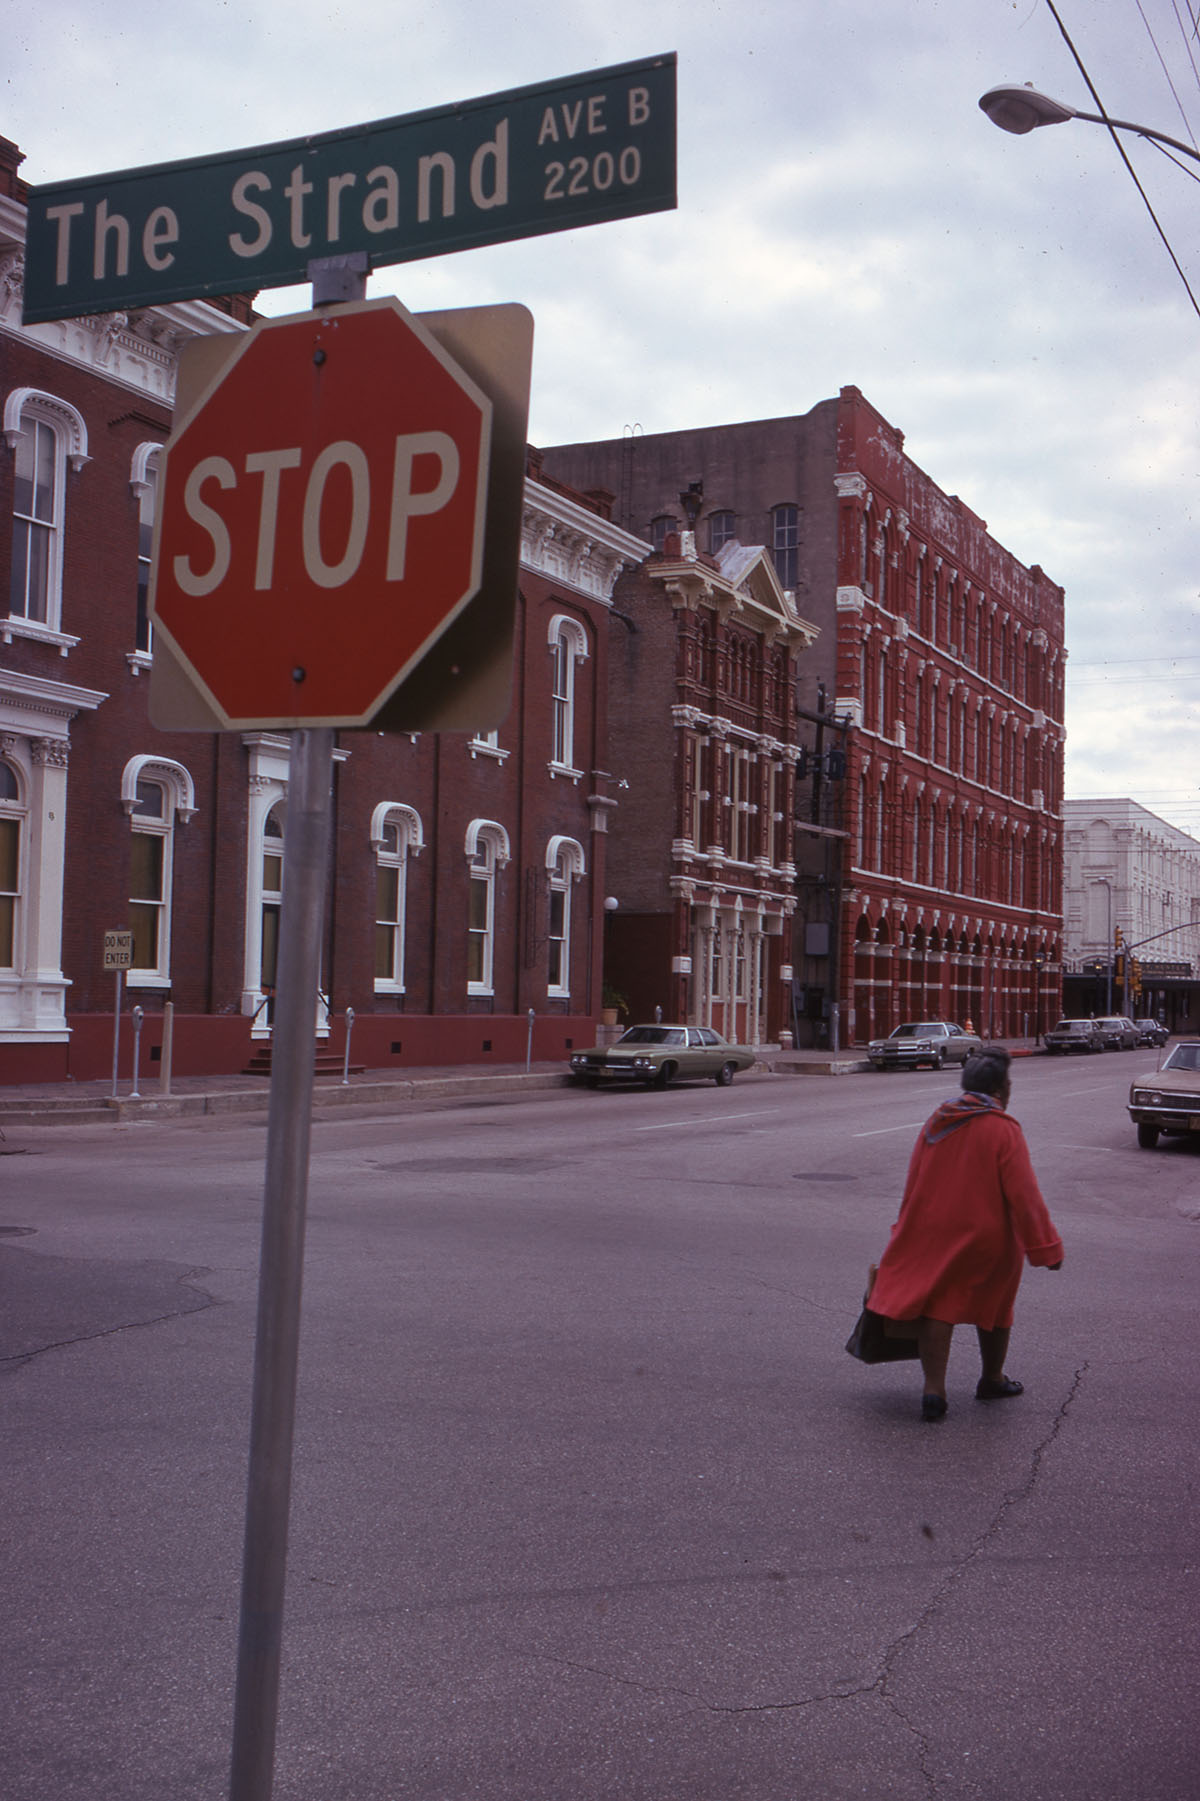 A person in a long red coat walks along a roadway under a street sign reading 